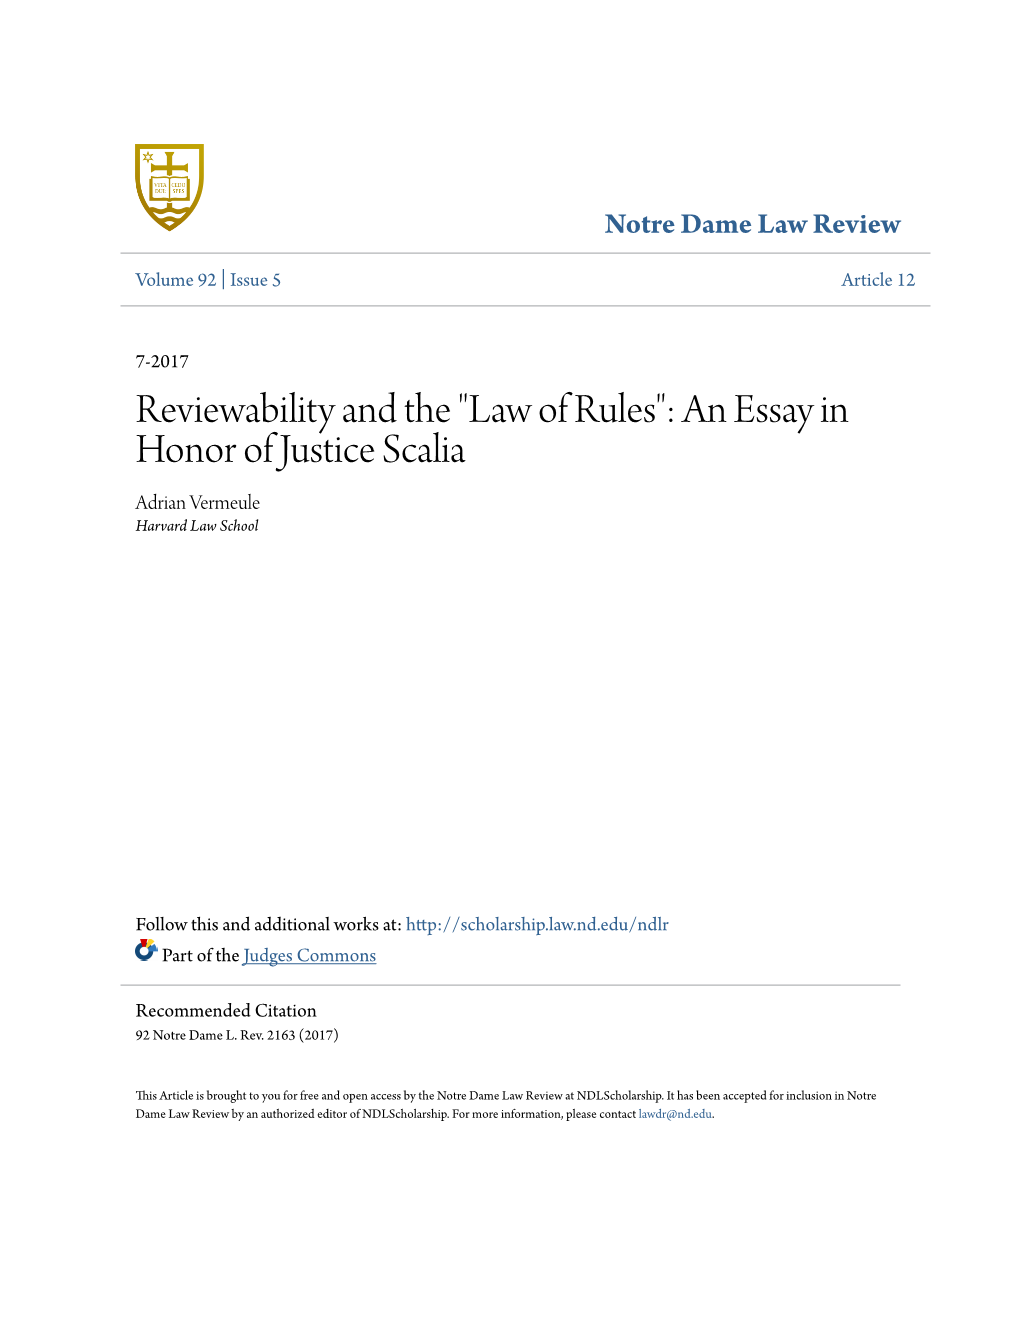 Reviewability and the "Law of Rules": an Essay in Honor of Justice Scalia Adrian Vermeule Harvard Law School